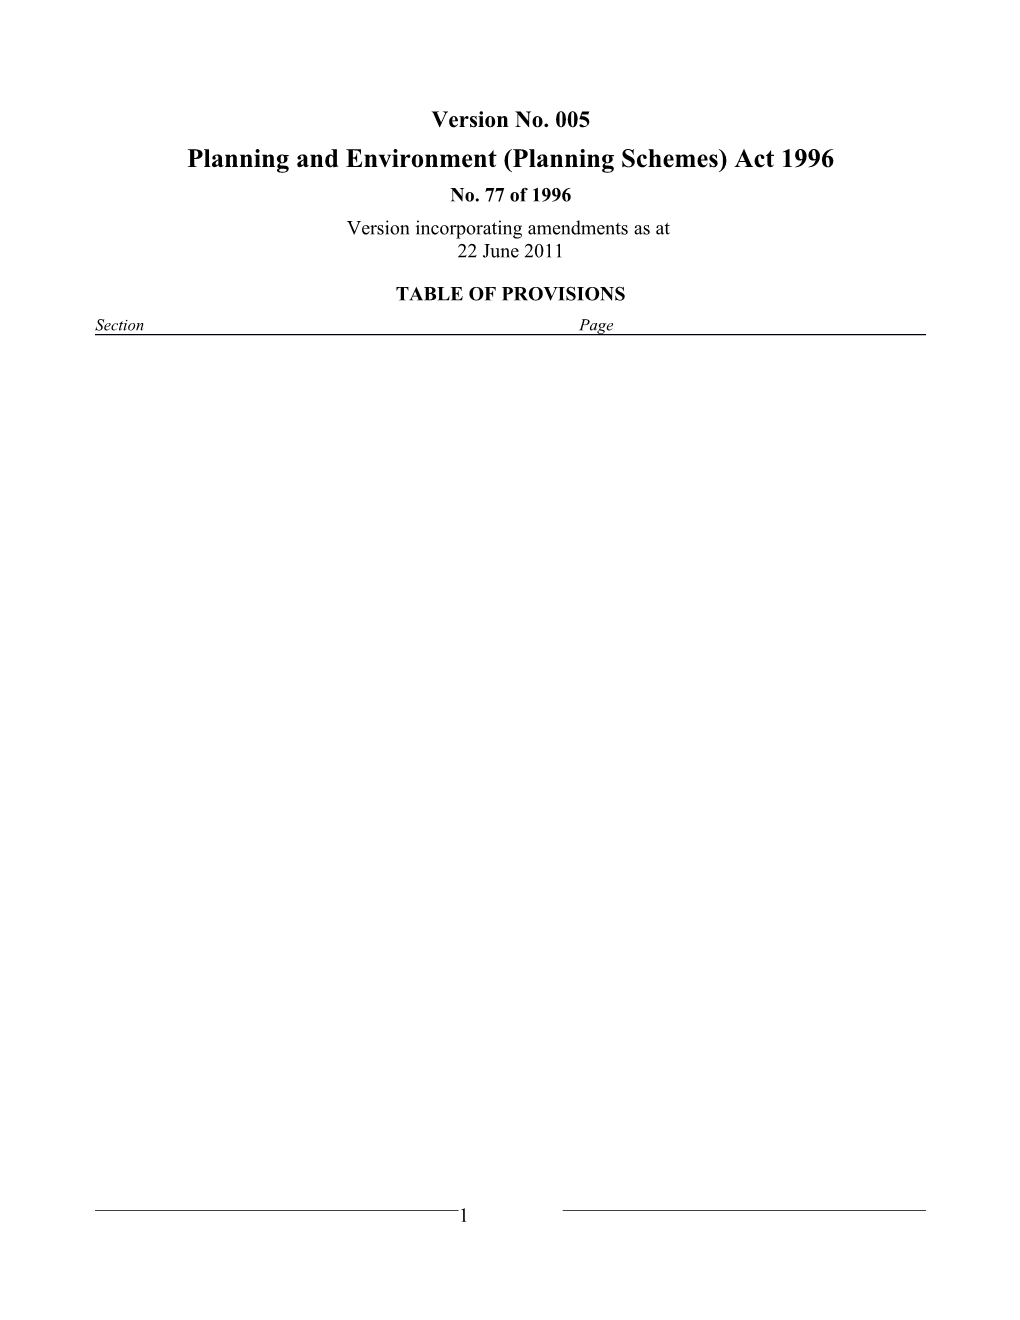 Planning and Environment (Planning Schemes) Act 1996